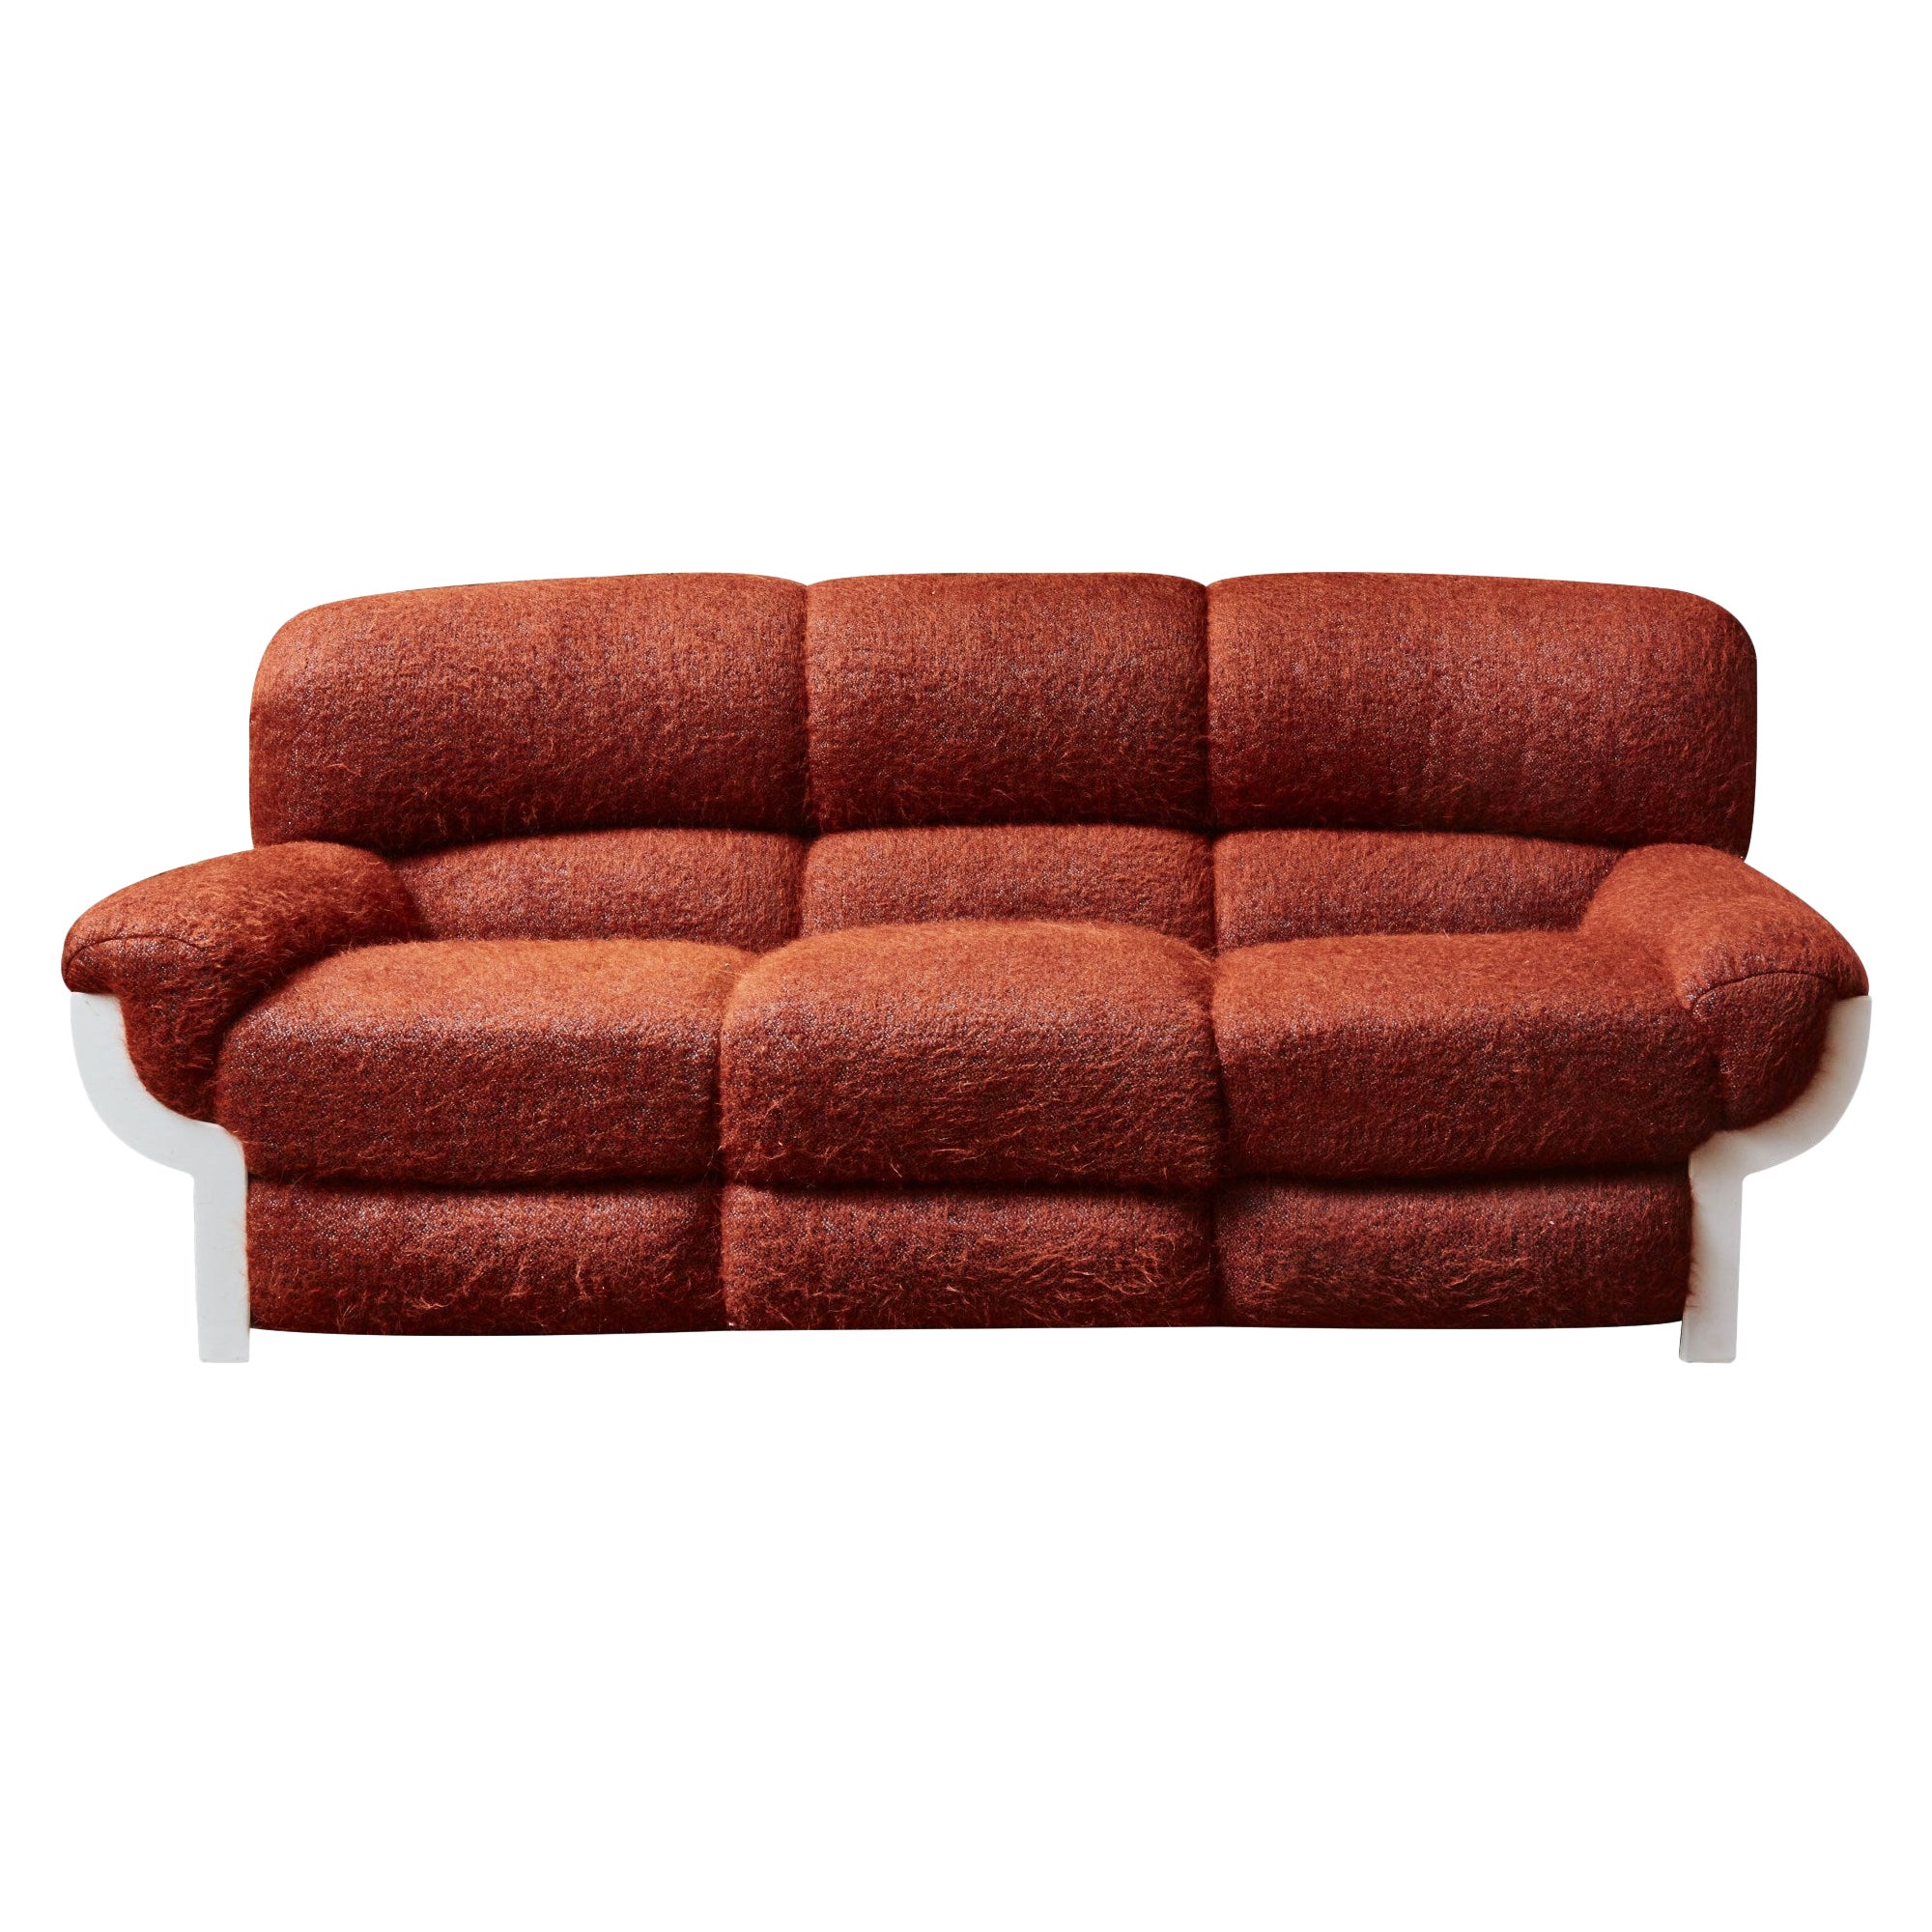 Vintage sofa At Cost Price For Sale